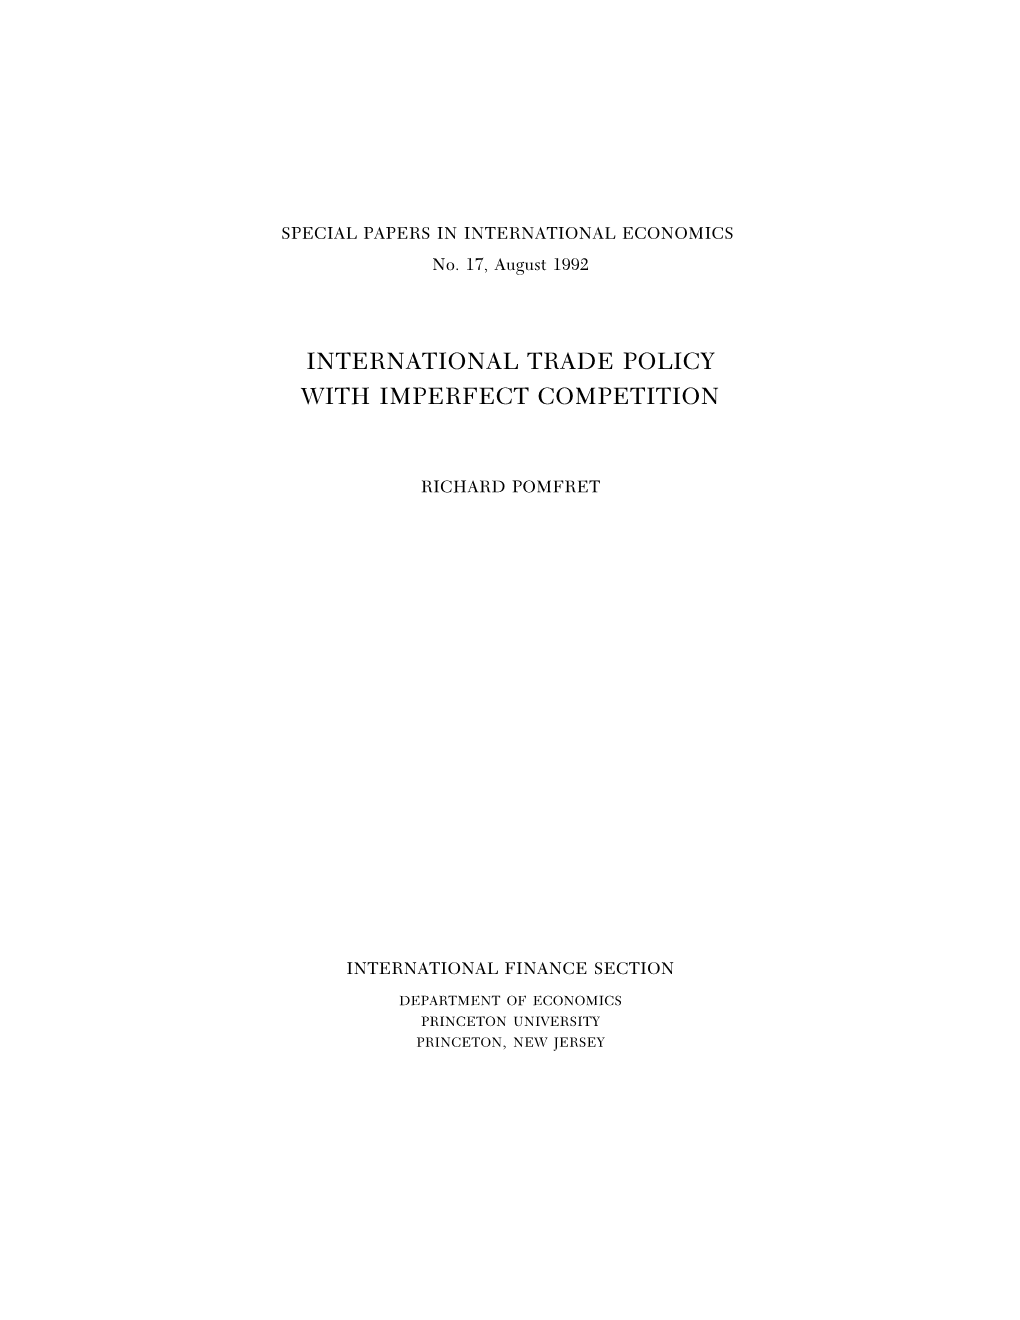 International Trade Policy with Imperfect Competition